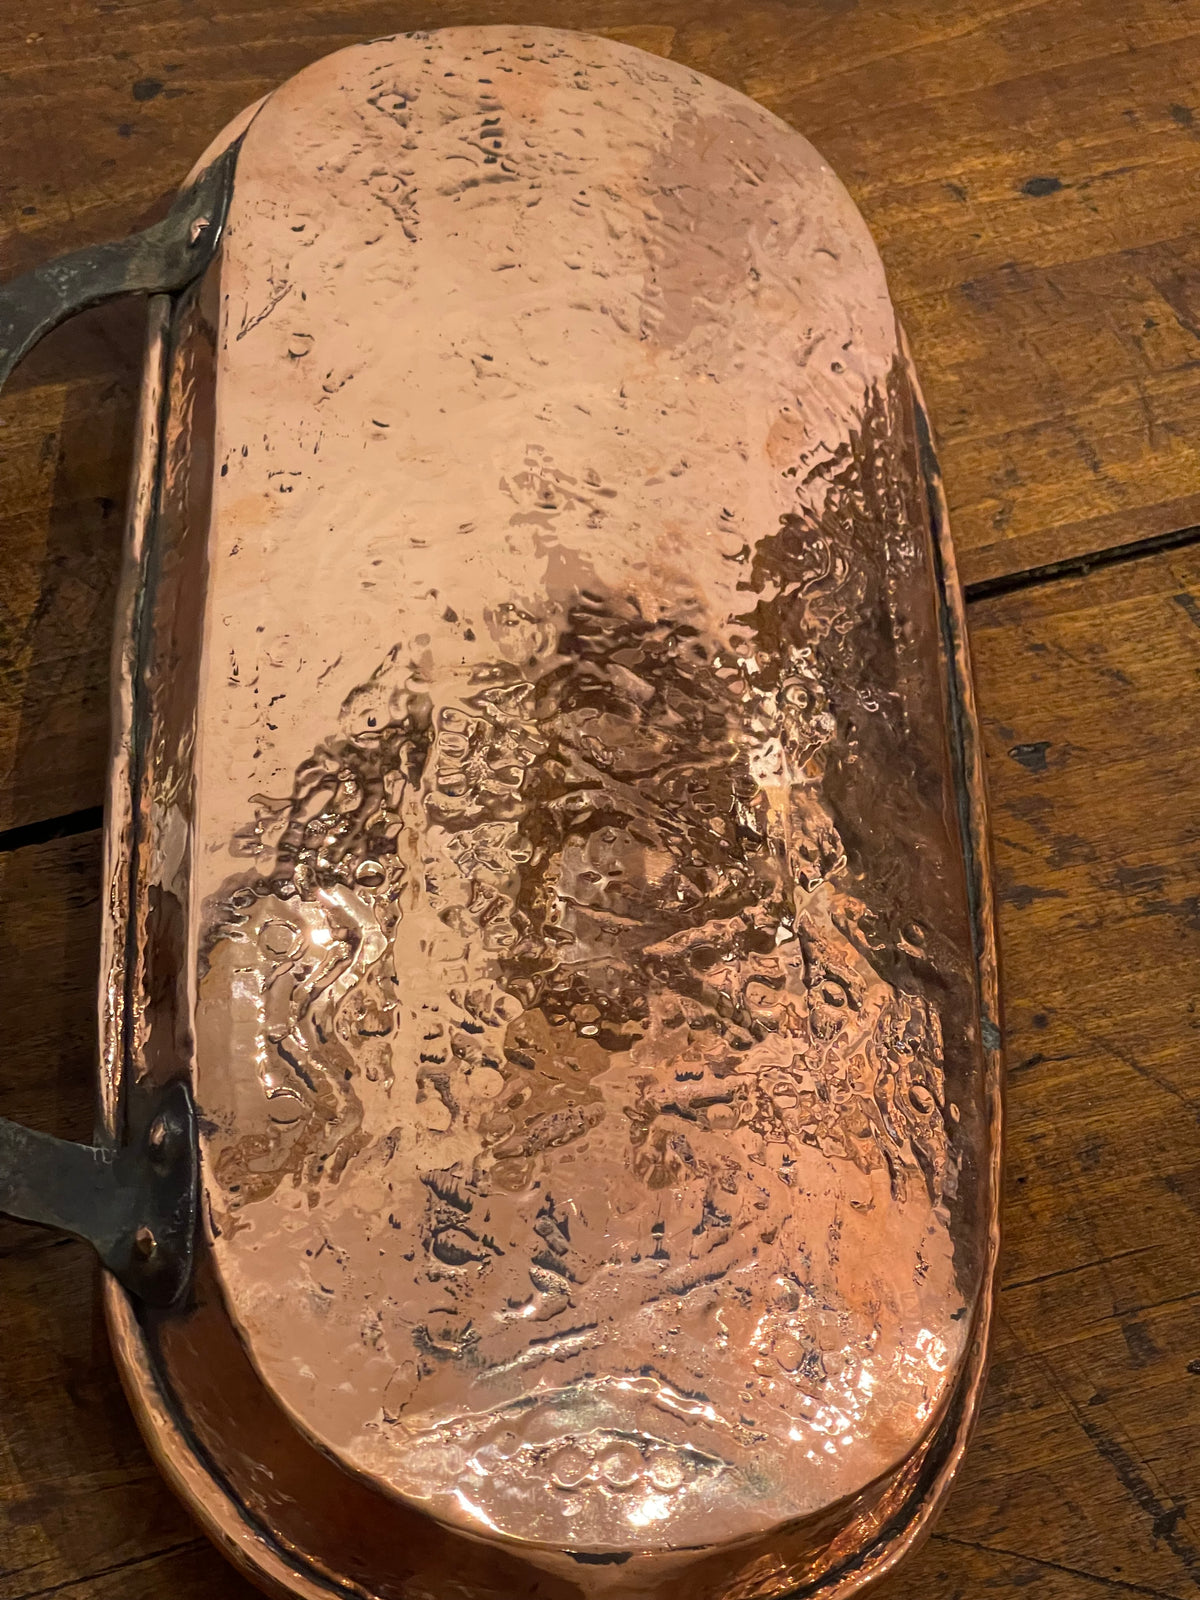 18TH CENTURY FRENCH LECHE FRITE COPPER DRIP PAN